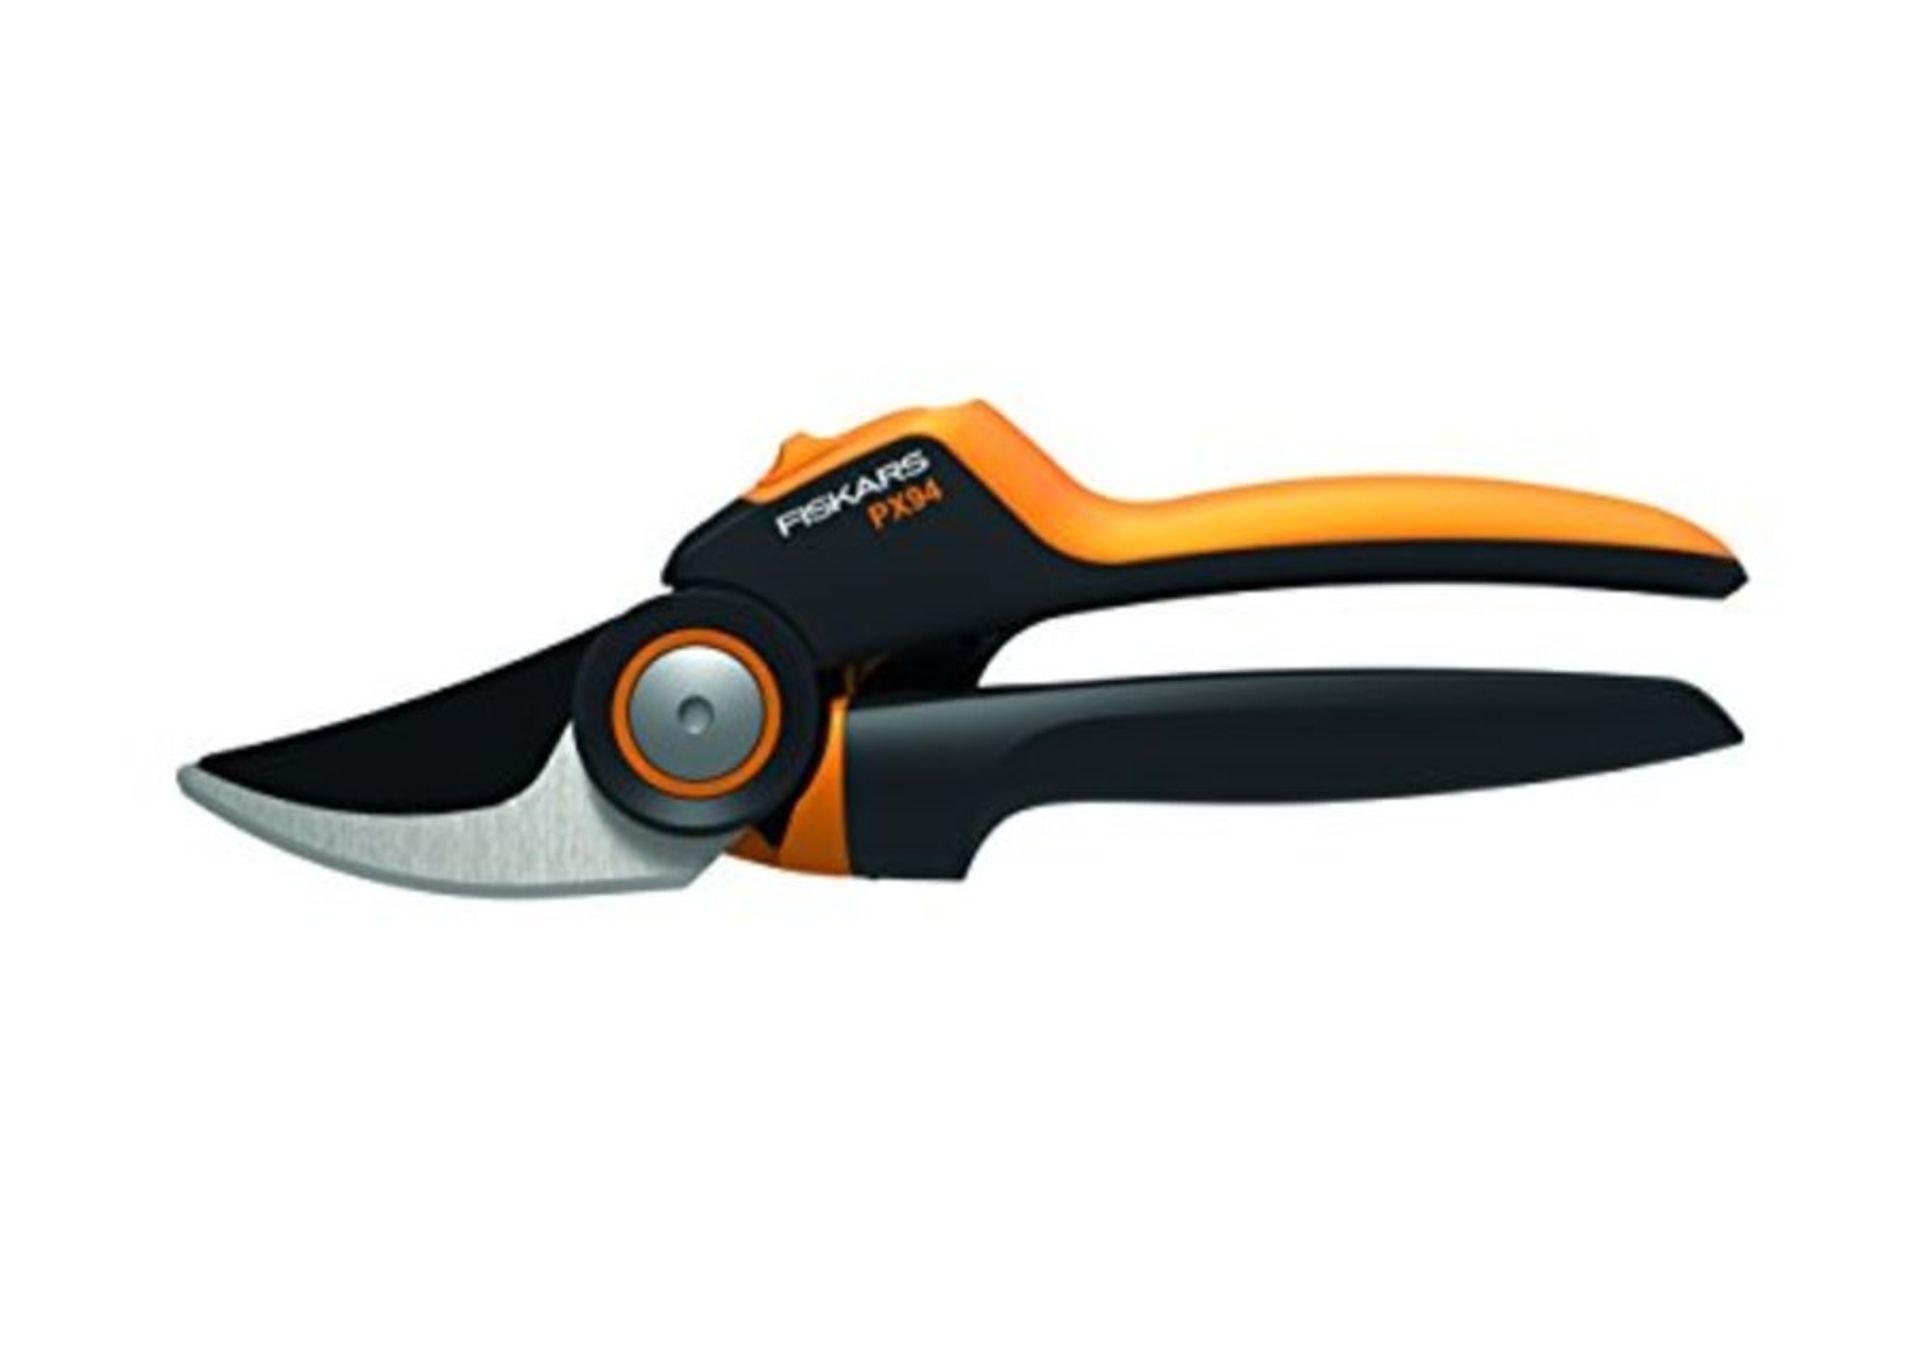 Fiskars Bypass Gardening Shears with Rolling Handle for Fresh Branches and Twigs, Non-